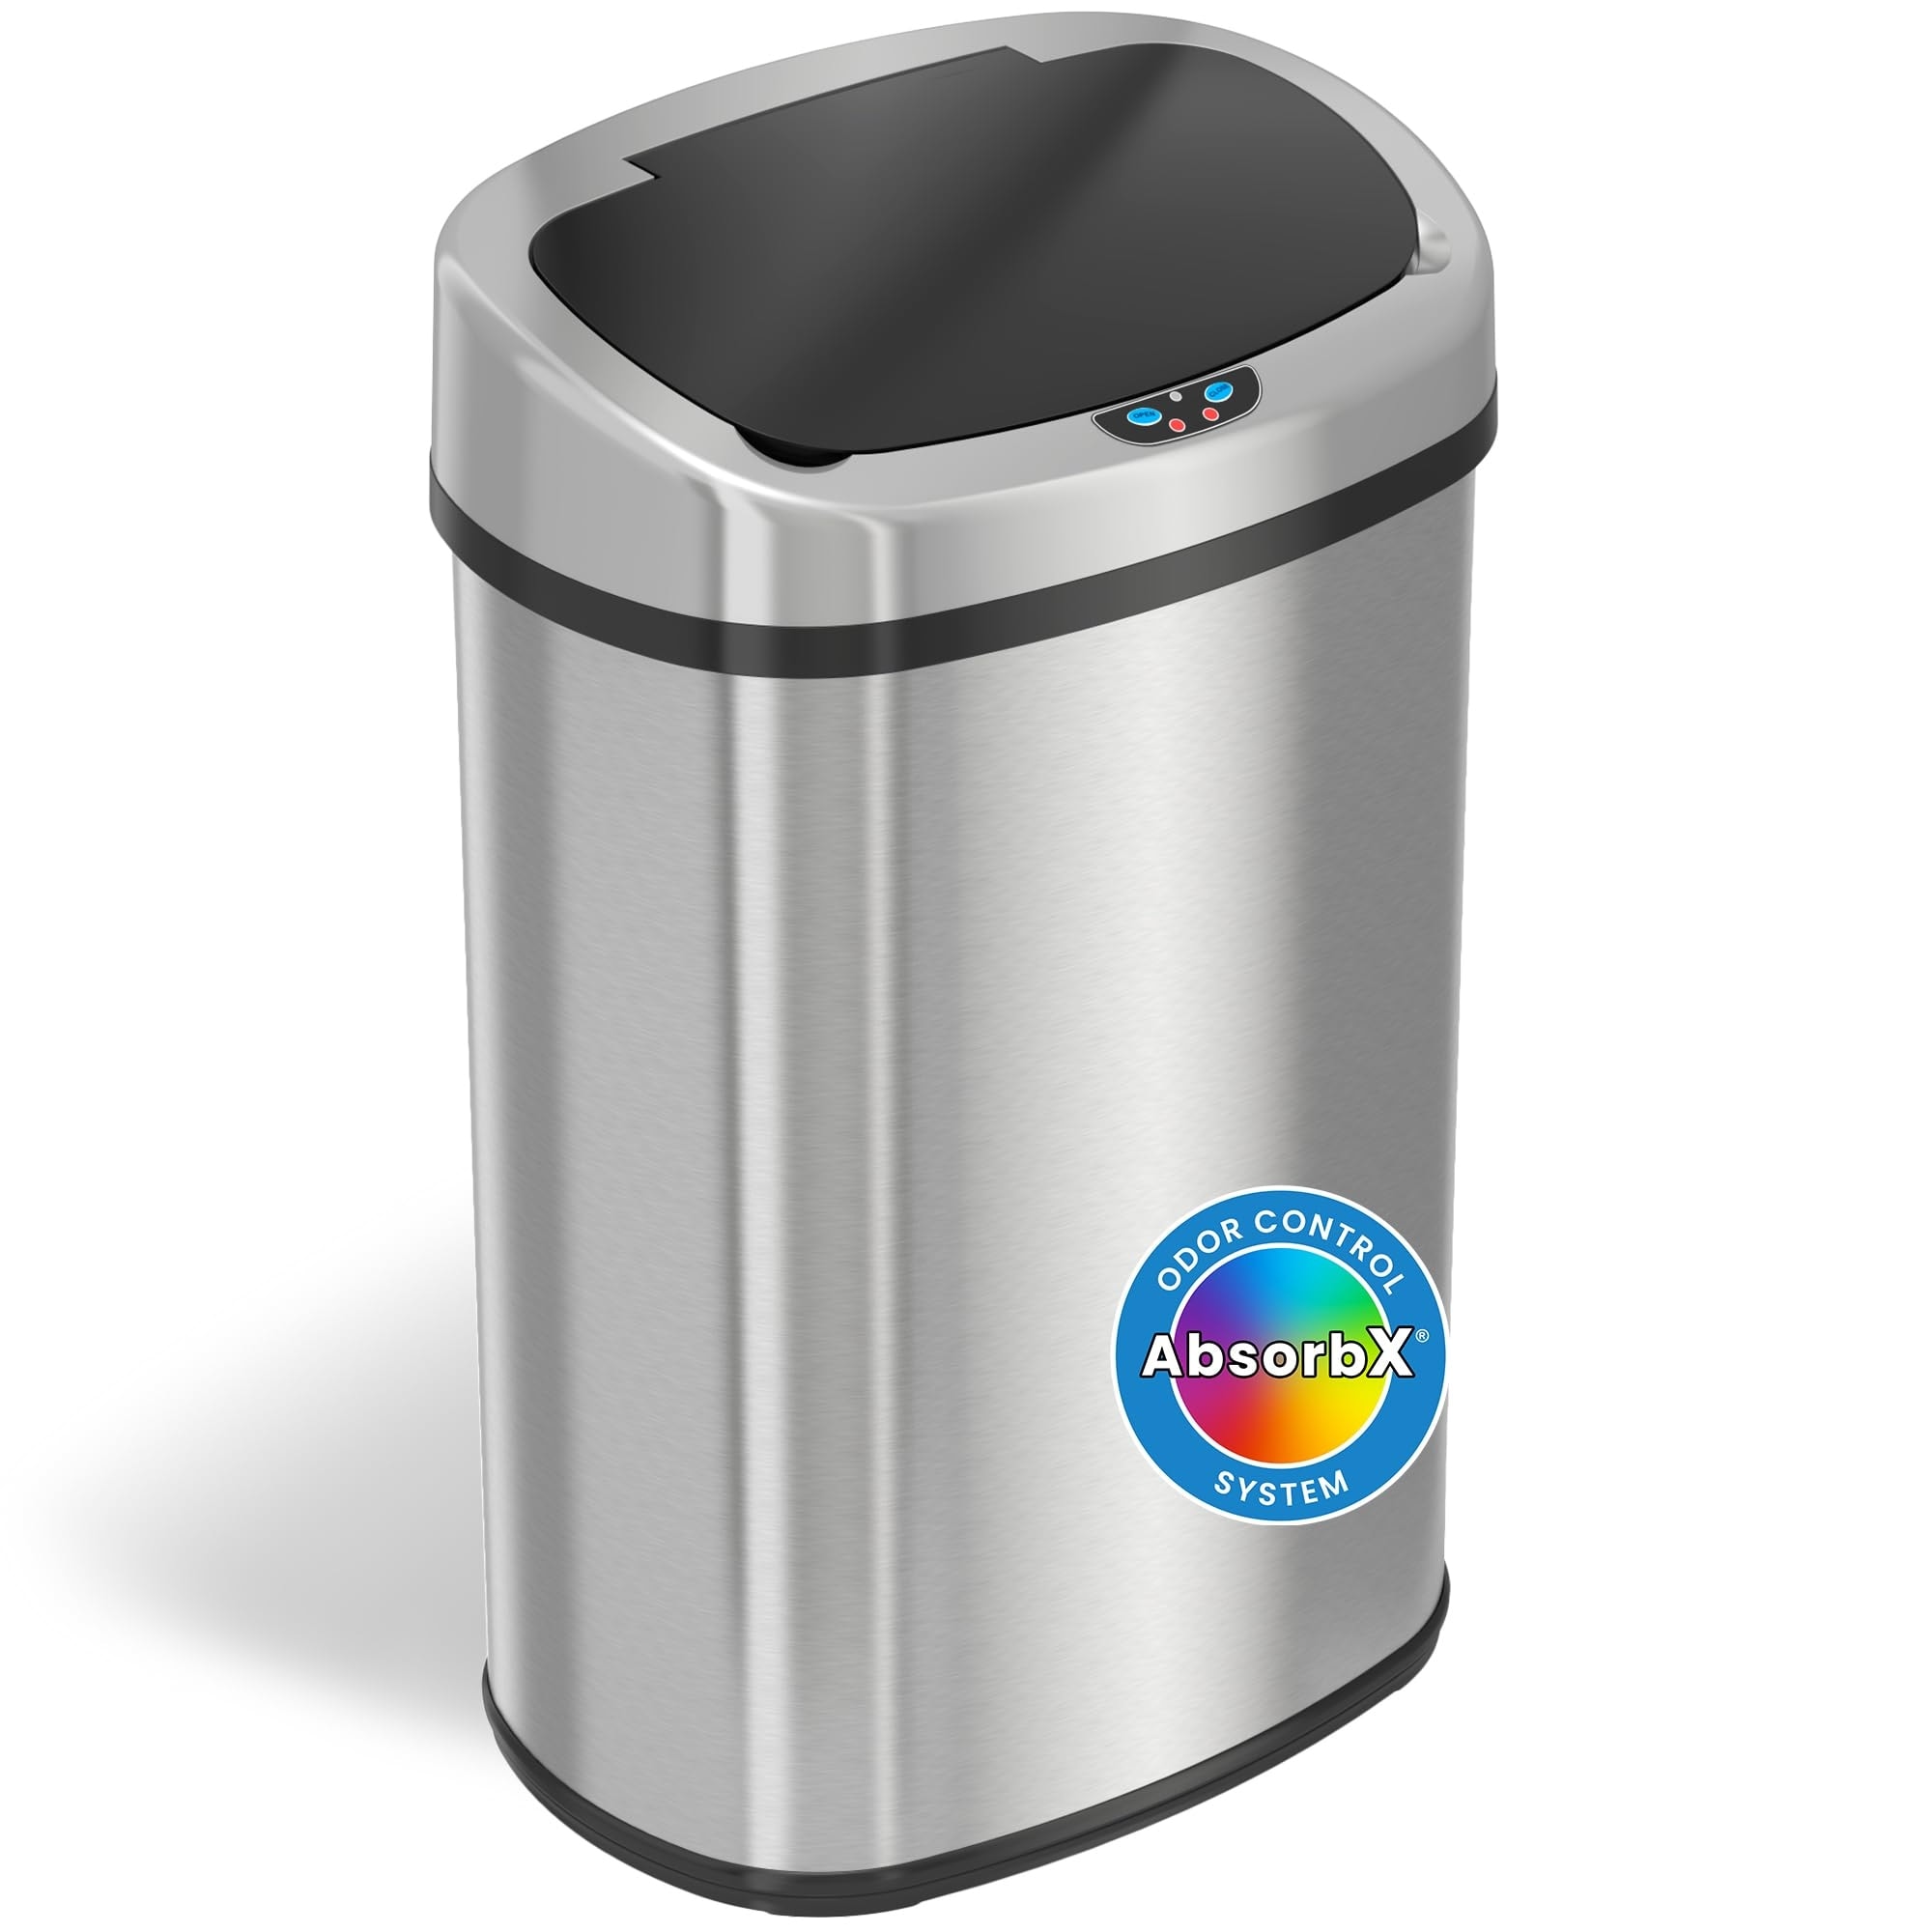 https://ak1.ostkcdn.com/images/products/is/images/direct/d606a915b0ecc4176943cf1fa934d98bf1df9a29/13-Gallon-SensorCan-Touchless-Trash-Can-with-Odor-Control-System%2C-Stainless-Steel%2C-Oval-Shape-Kitchen-Bin.jpg